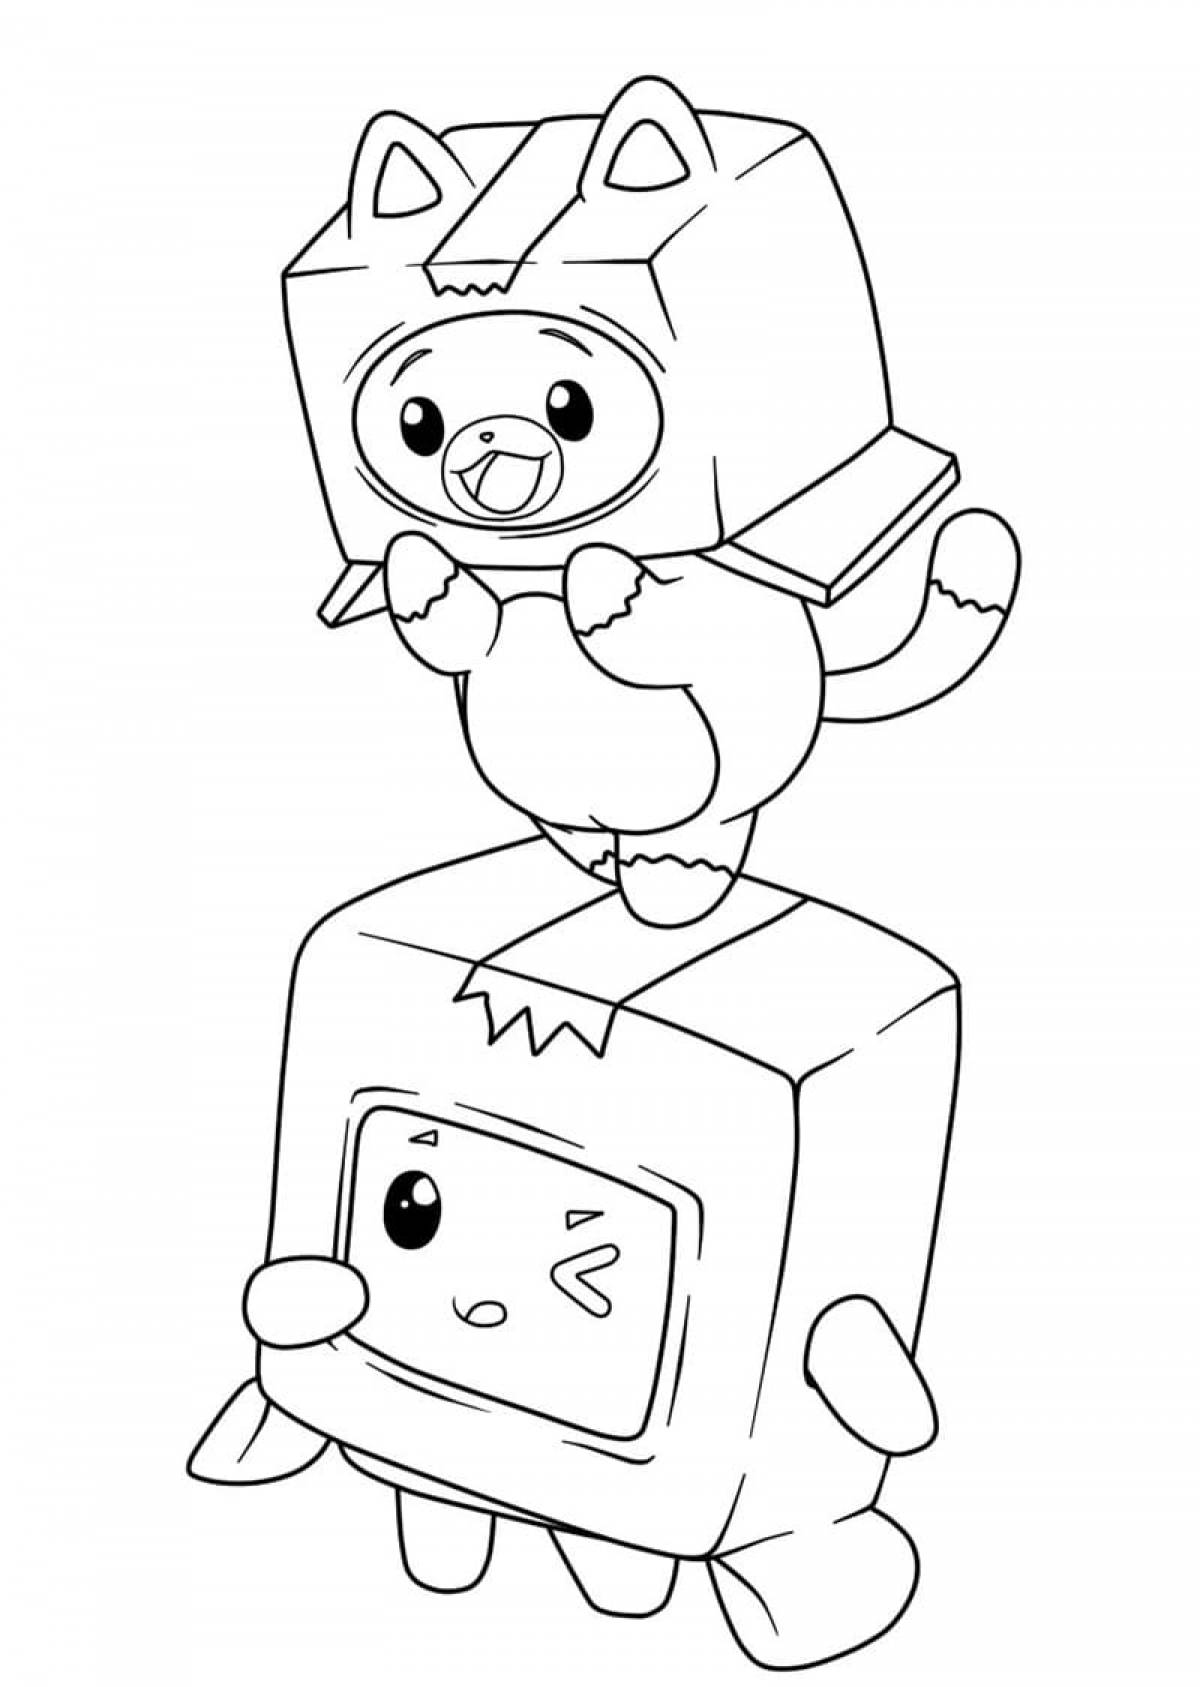 Boxy boo for kids #20